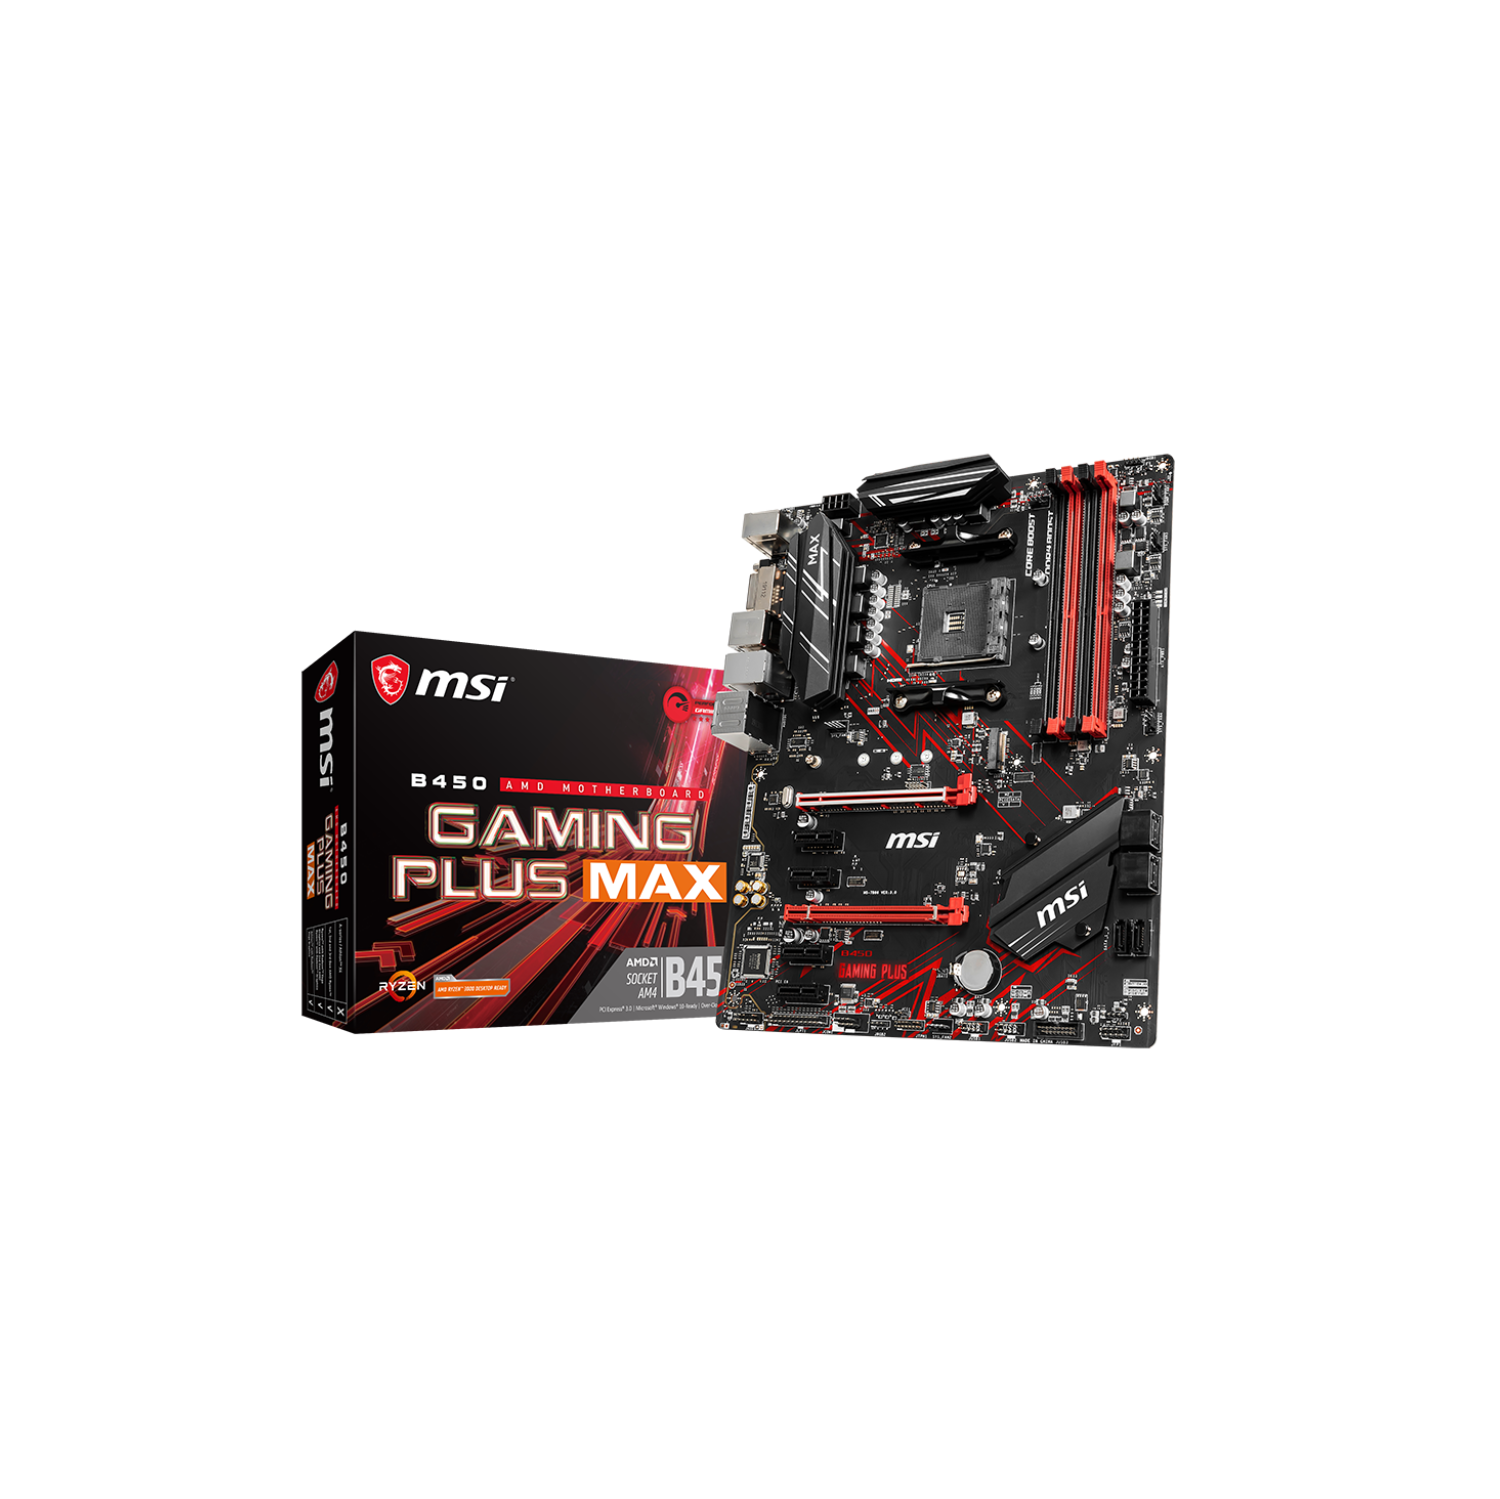 MSI B450 GAMING PLUS MAX ATX Motherbaord (Supports 1st, 2nd and 3rd Gen AMD Ryzen CPU, AM4, DDR4, PCIe 3.0, M.2, ATX)